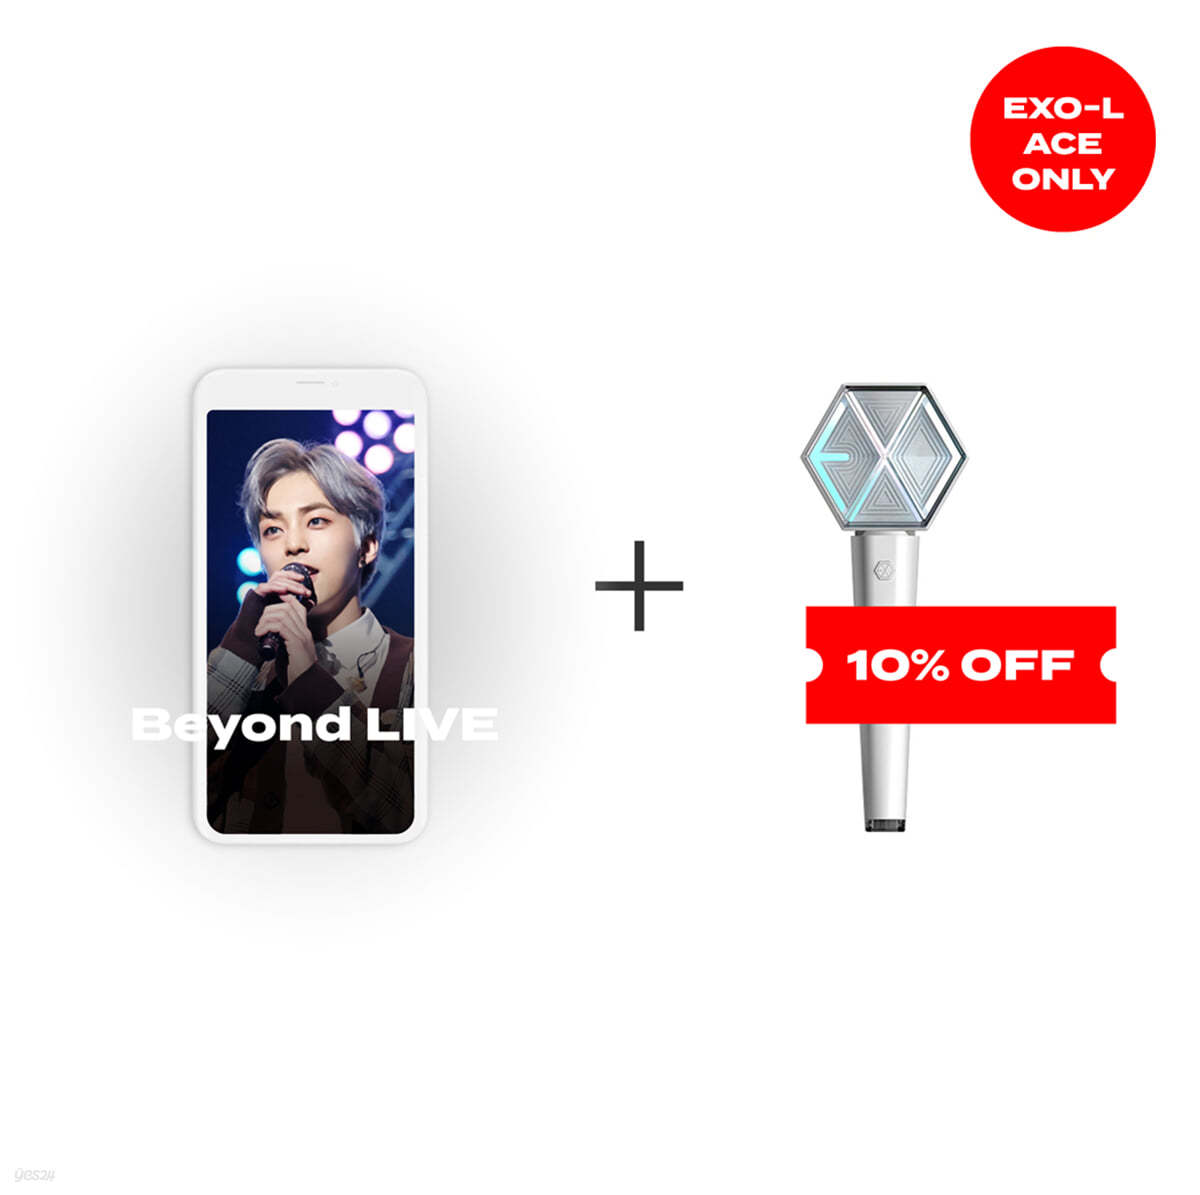 [EXO-L ACE ONLY] Beyond LIVE 관람권 + EXO 엑소 공식응원봉 [VER 3.0] 2021 ON : XIUWEET TIME